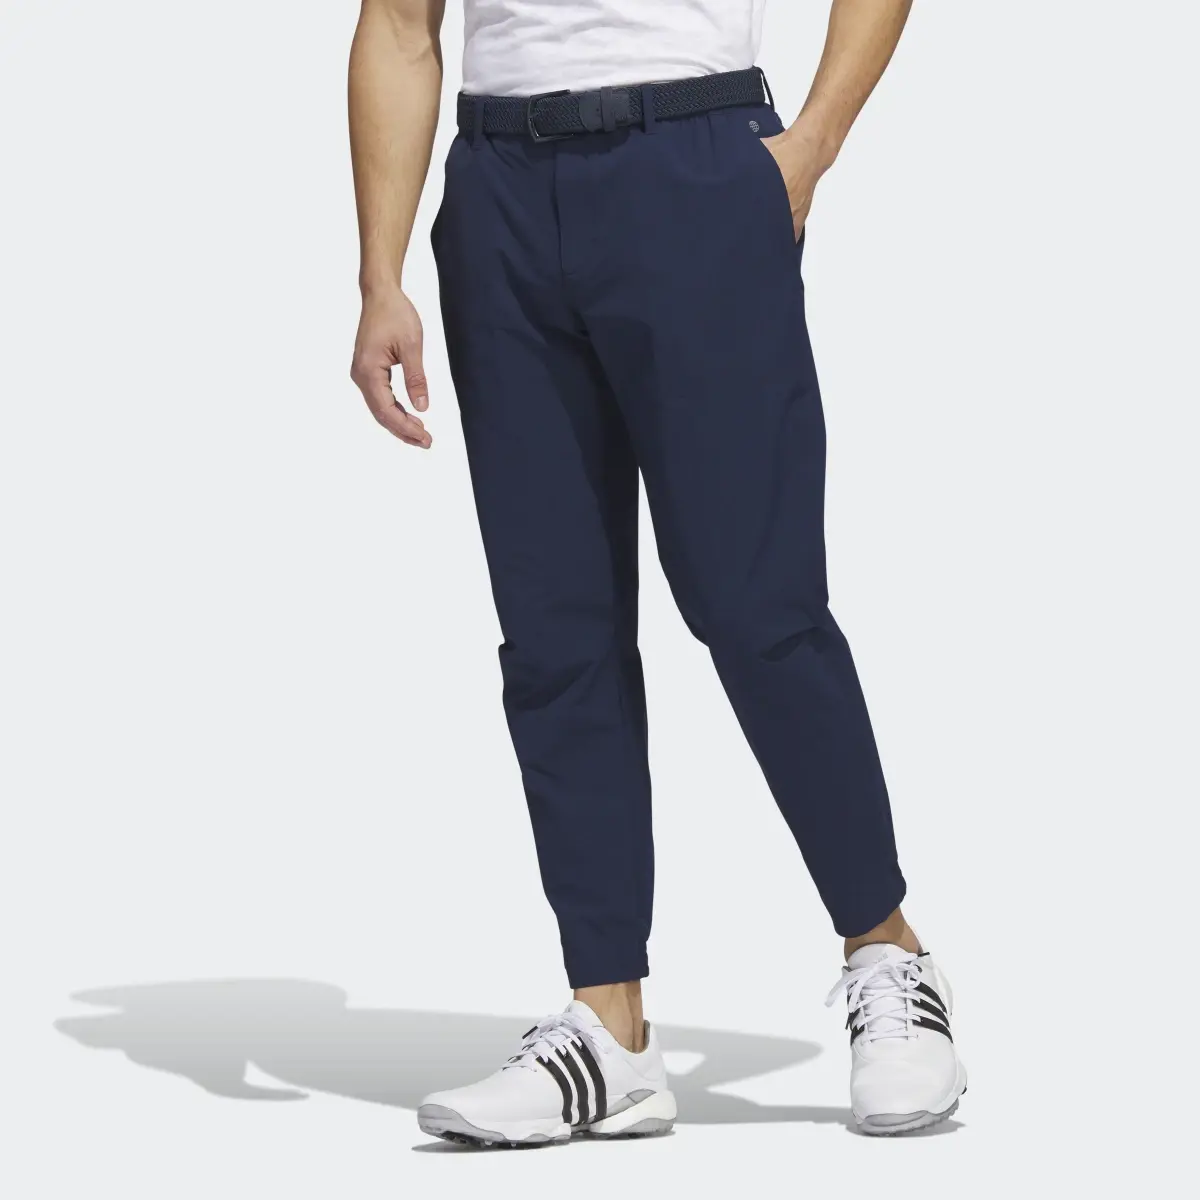 Adidas Go-To Commuter Trousers. 1